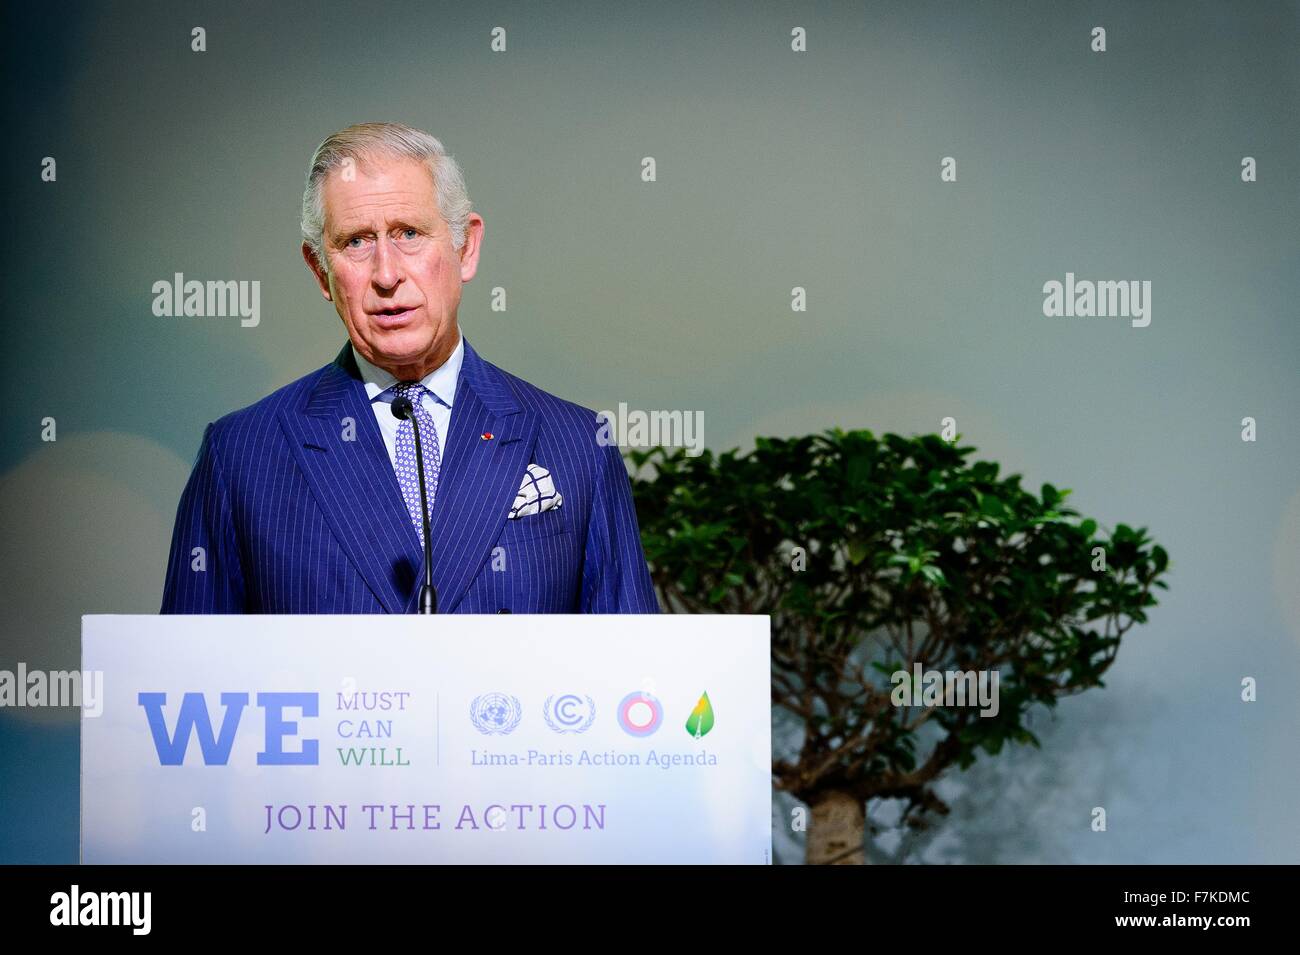 Le Bourget, France. 30th November, 2015. Prince Charles address the Forest Focus Day session of the COP21, United Nations Climate Change Conference on behalf of the United Kingdom December 1, 2015 outside Paris in Le Bourget, France. Stock Photo